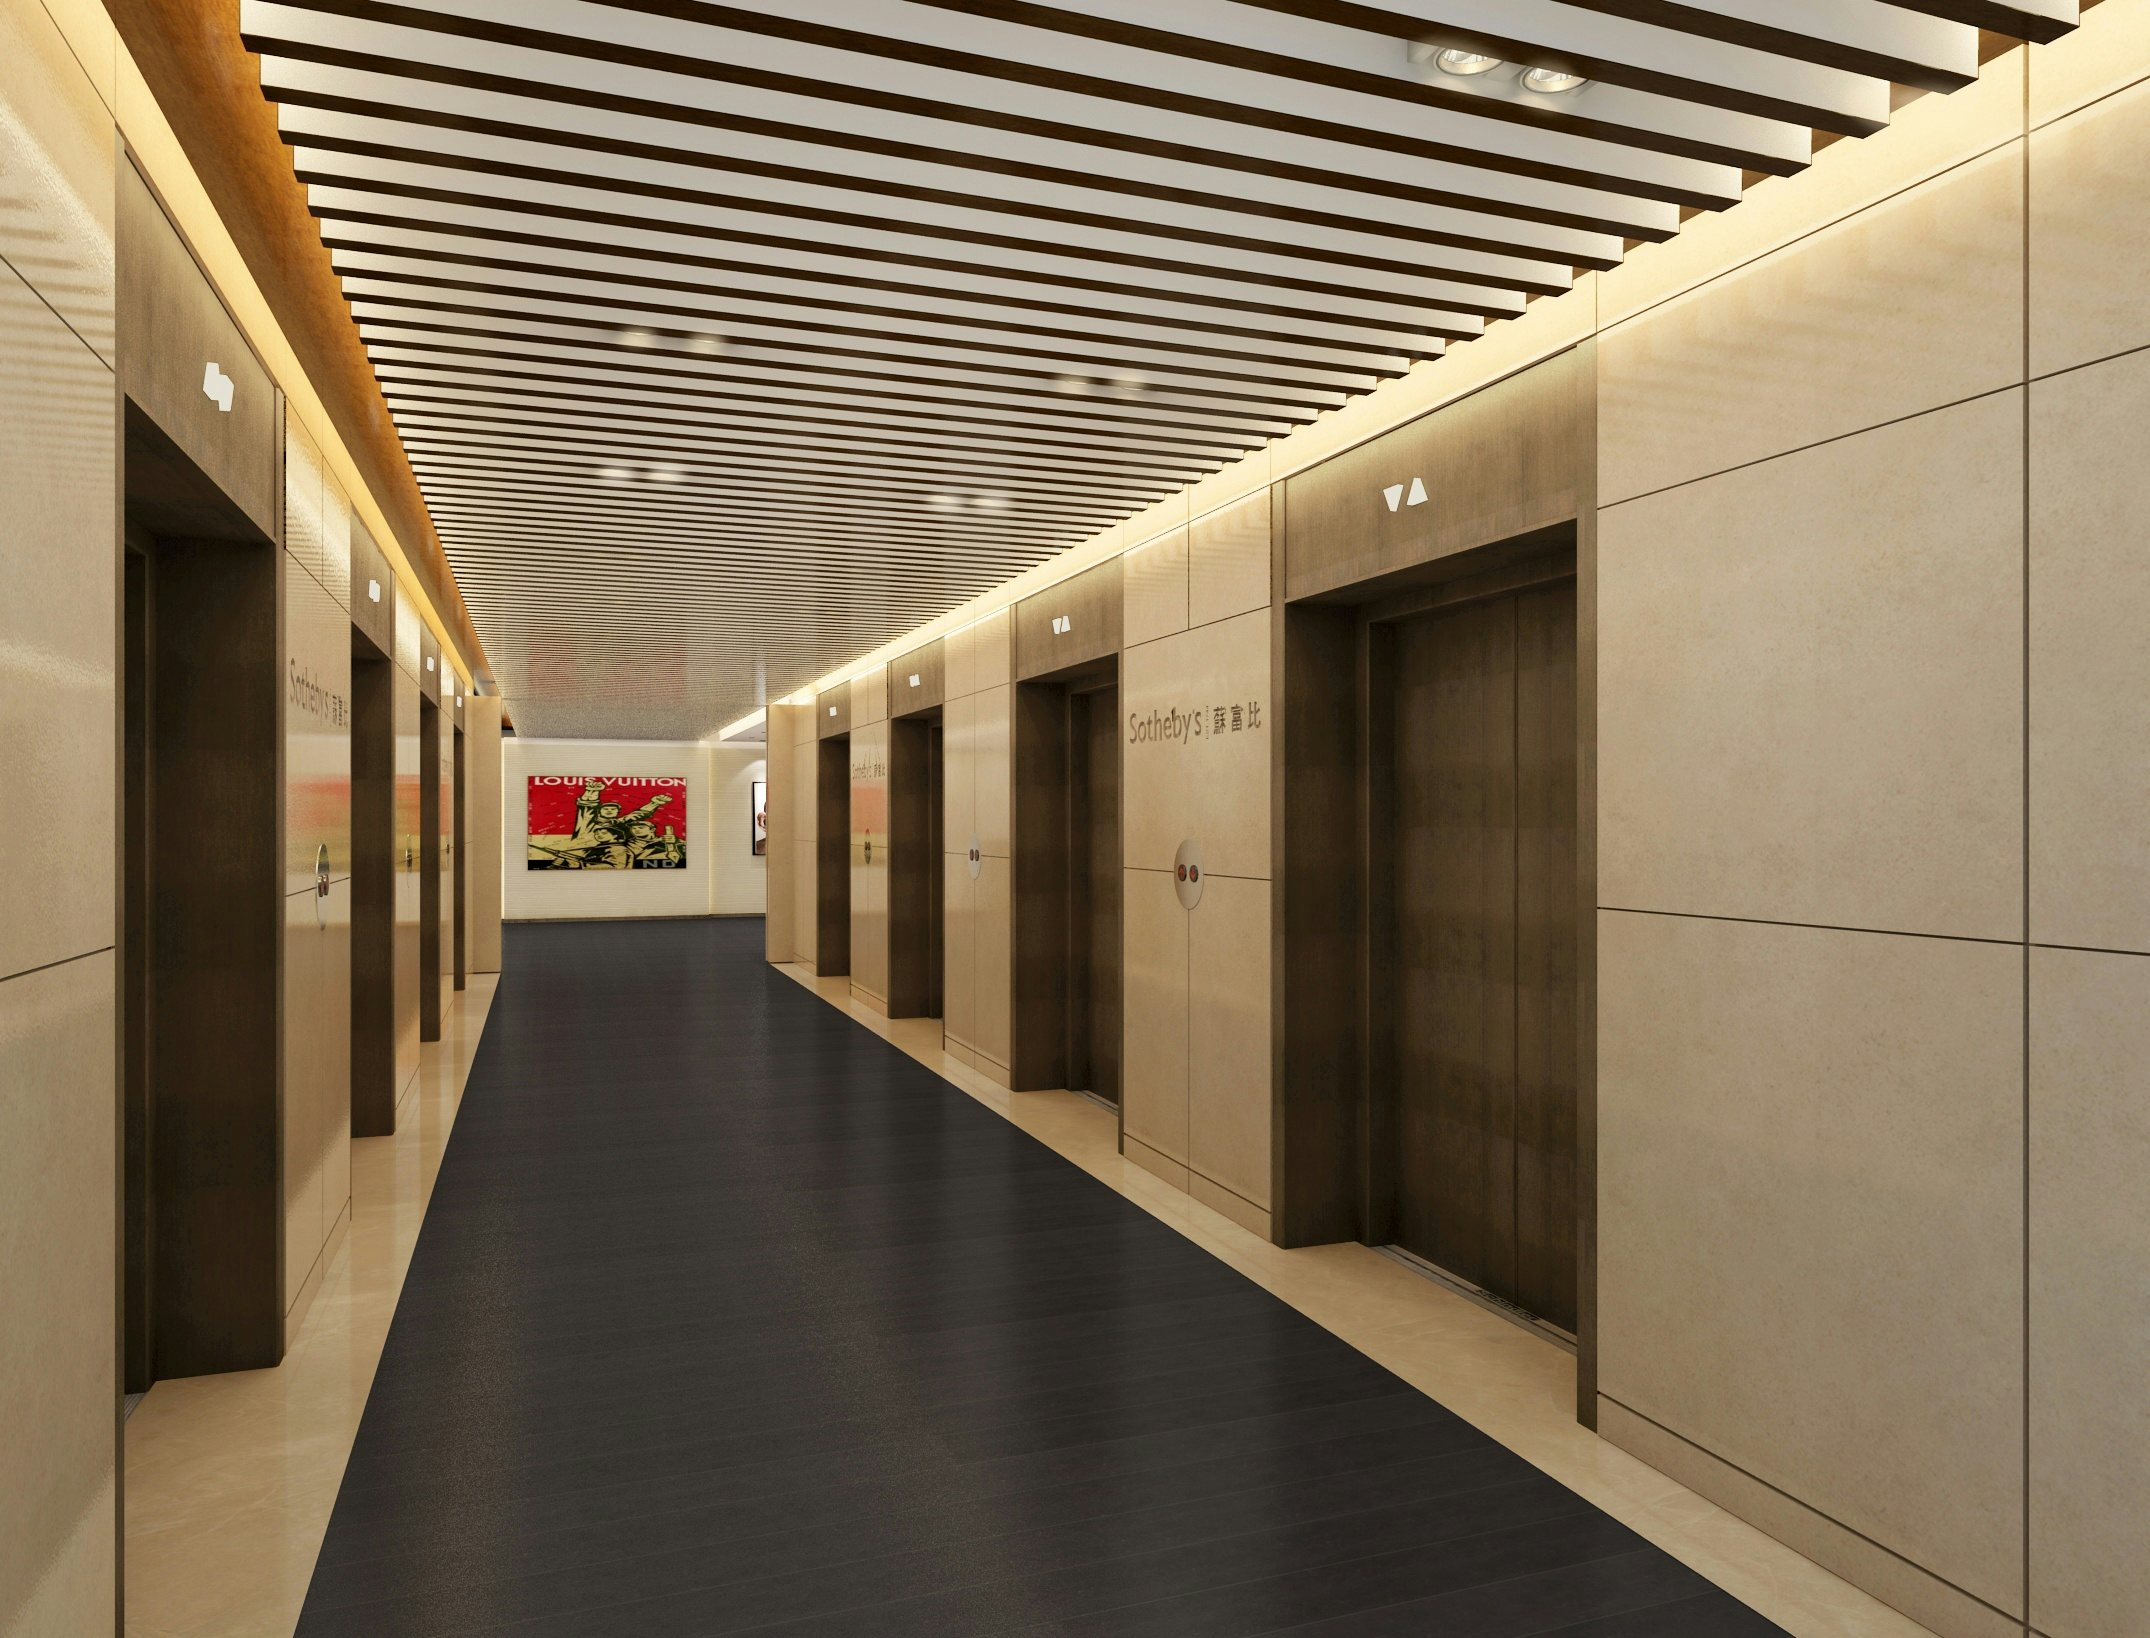 Sotheby's opened a 15,000 square foot multi-use space in Hong Kong last May